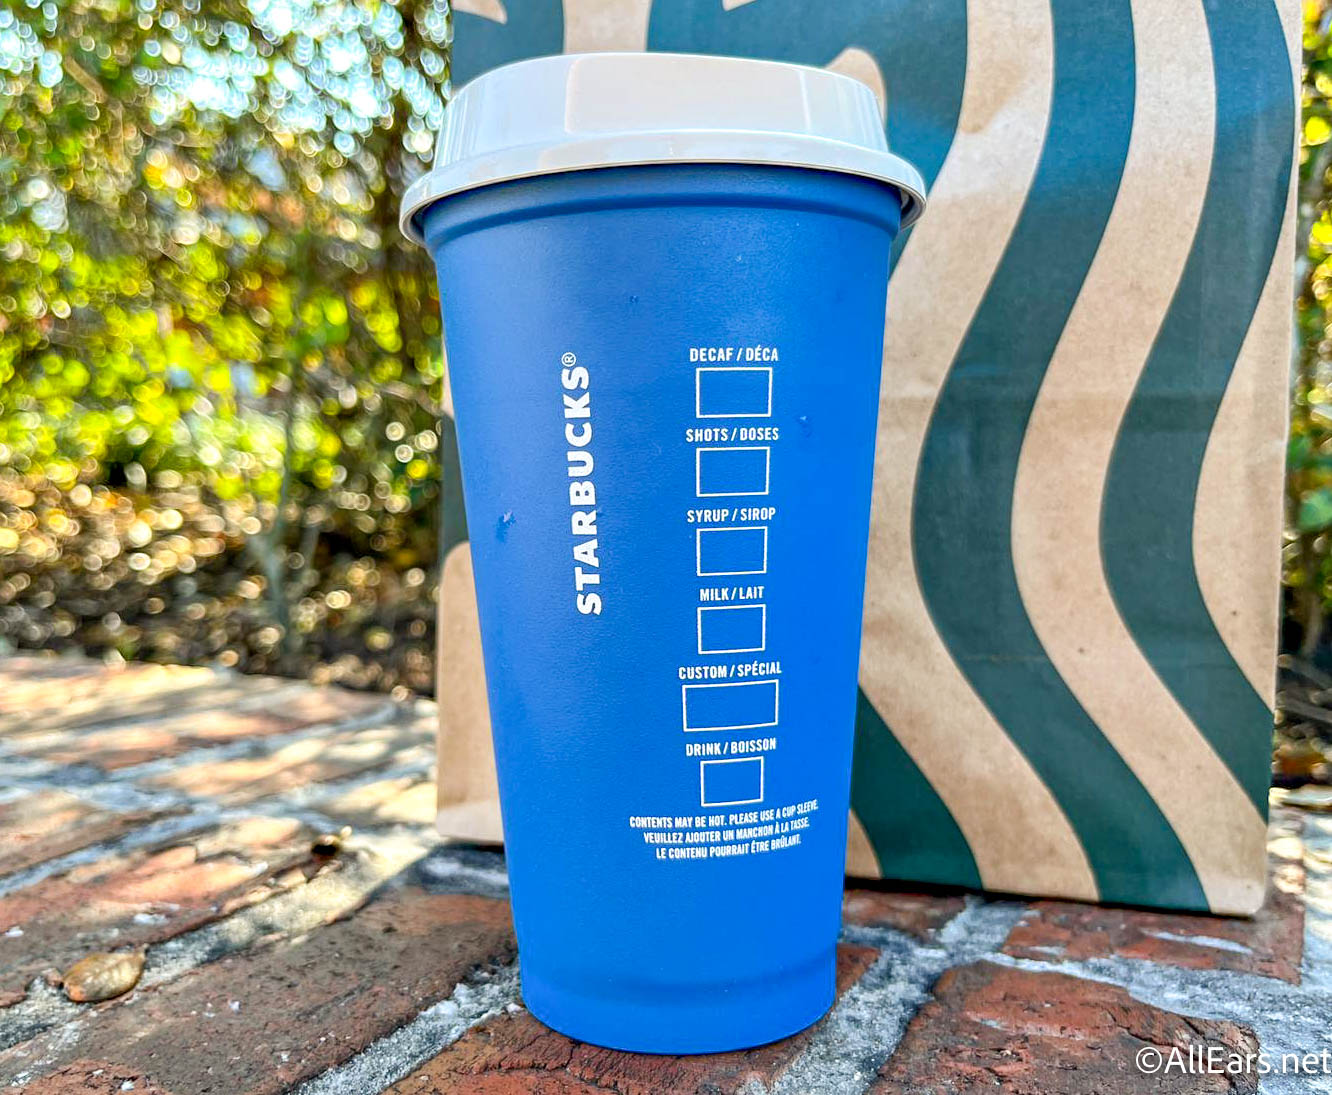 https://allears.net/wp-content/uploads/2021/12/2021-wdw-disney-springs-starbucks-color-changing-candy-cane-cup-6.jpg